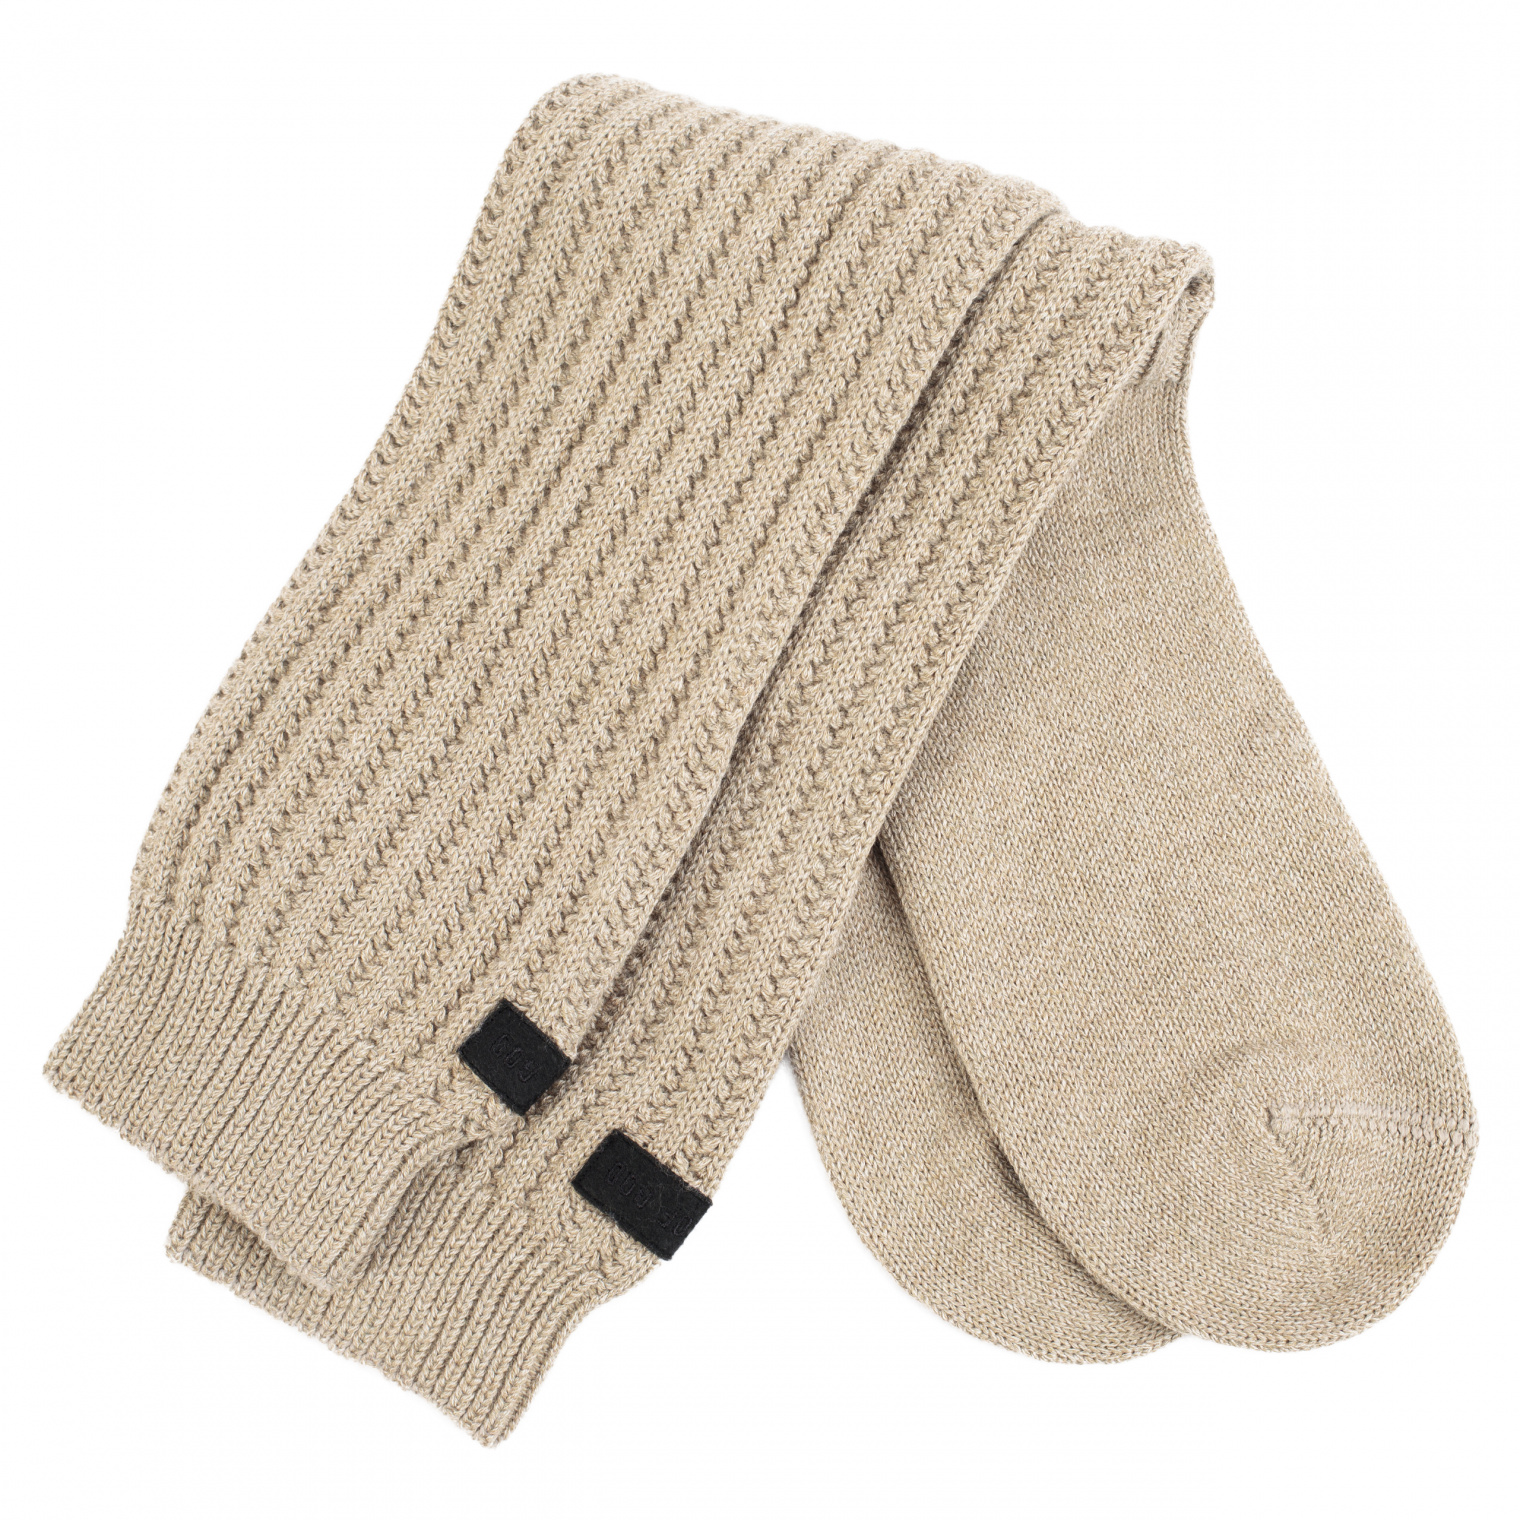 Fear of God 7th Collection Socks in beige